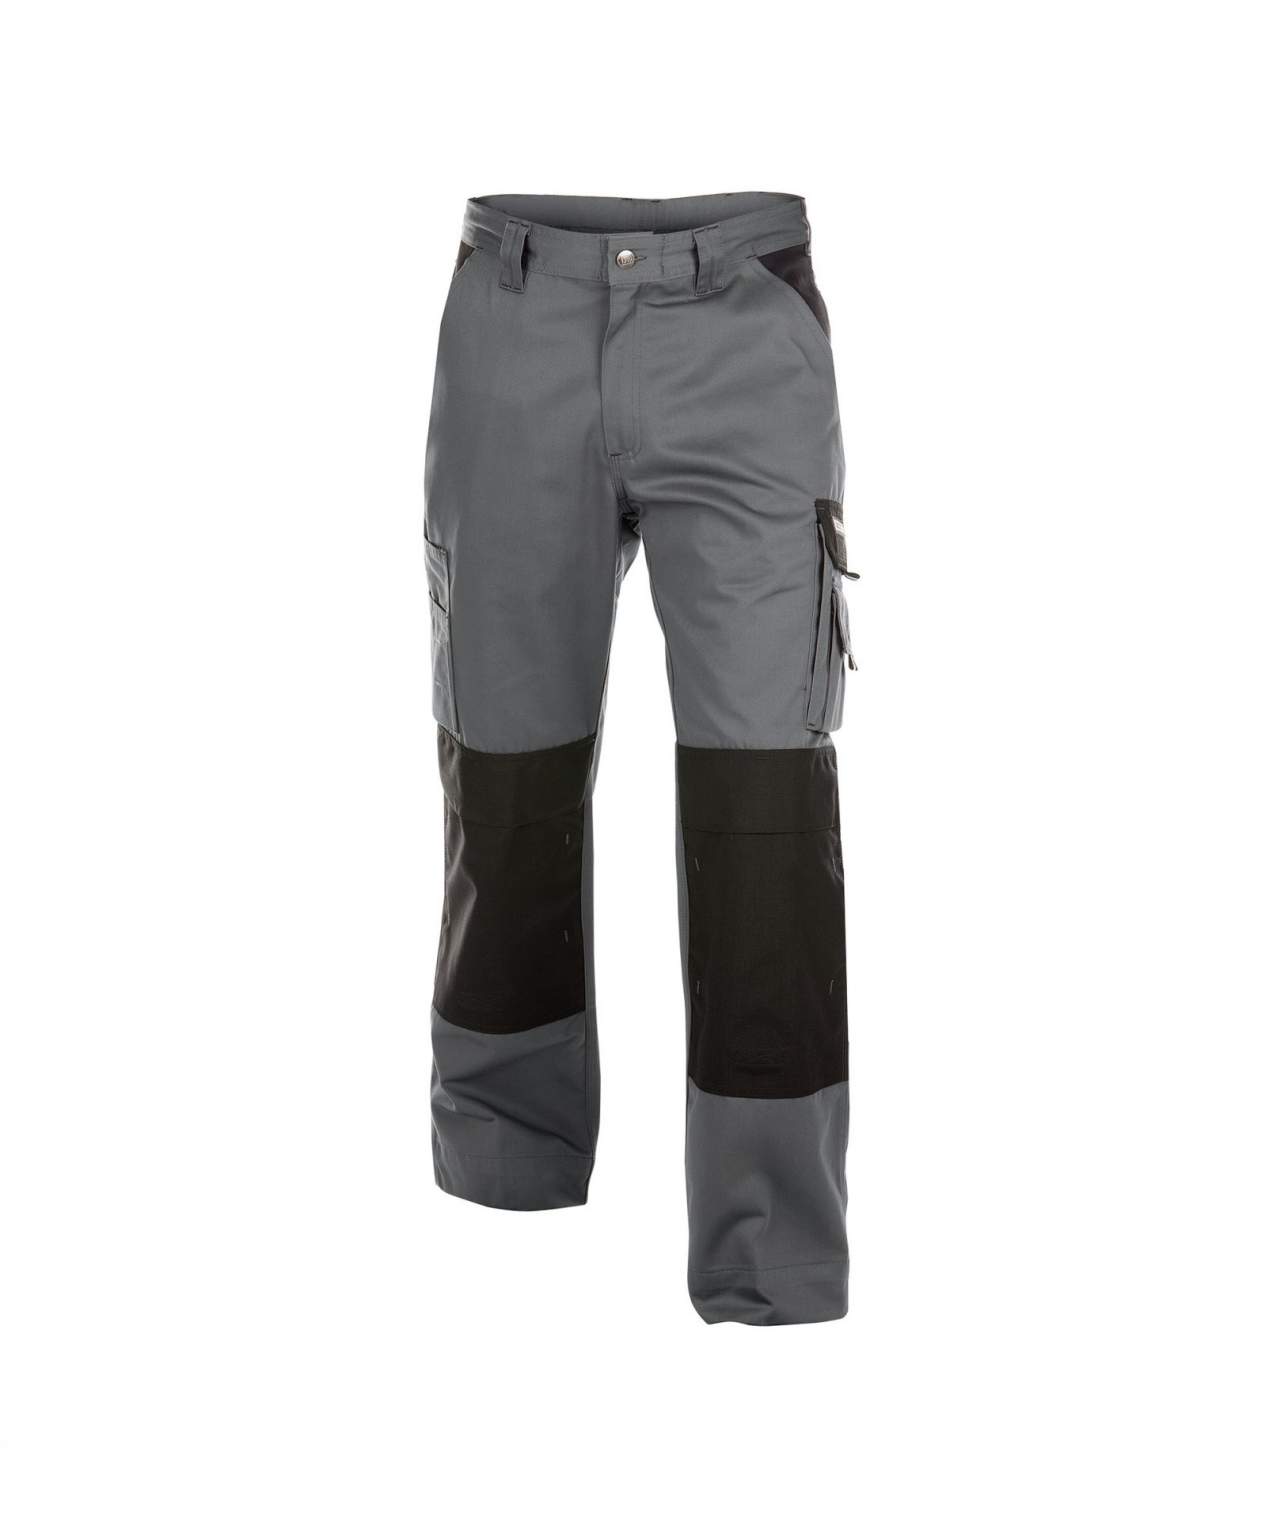 boston two tone work trousers with knee pockets cement grey black front